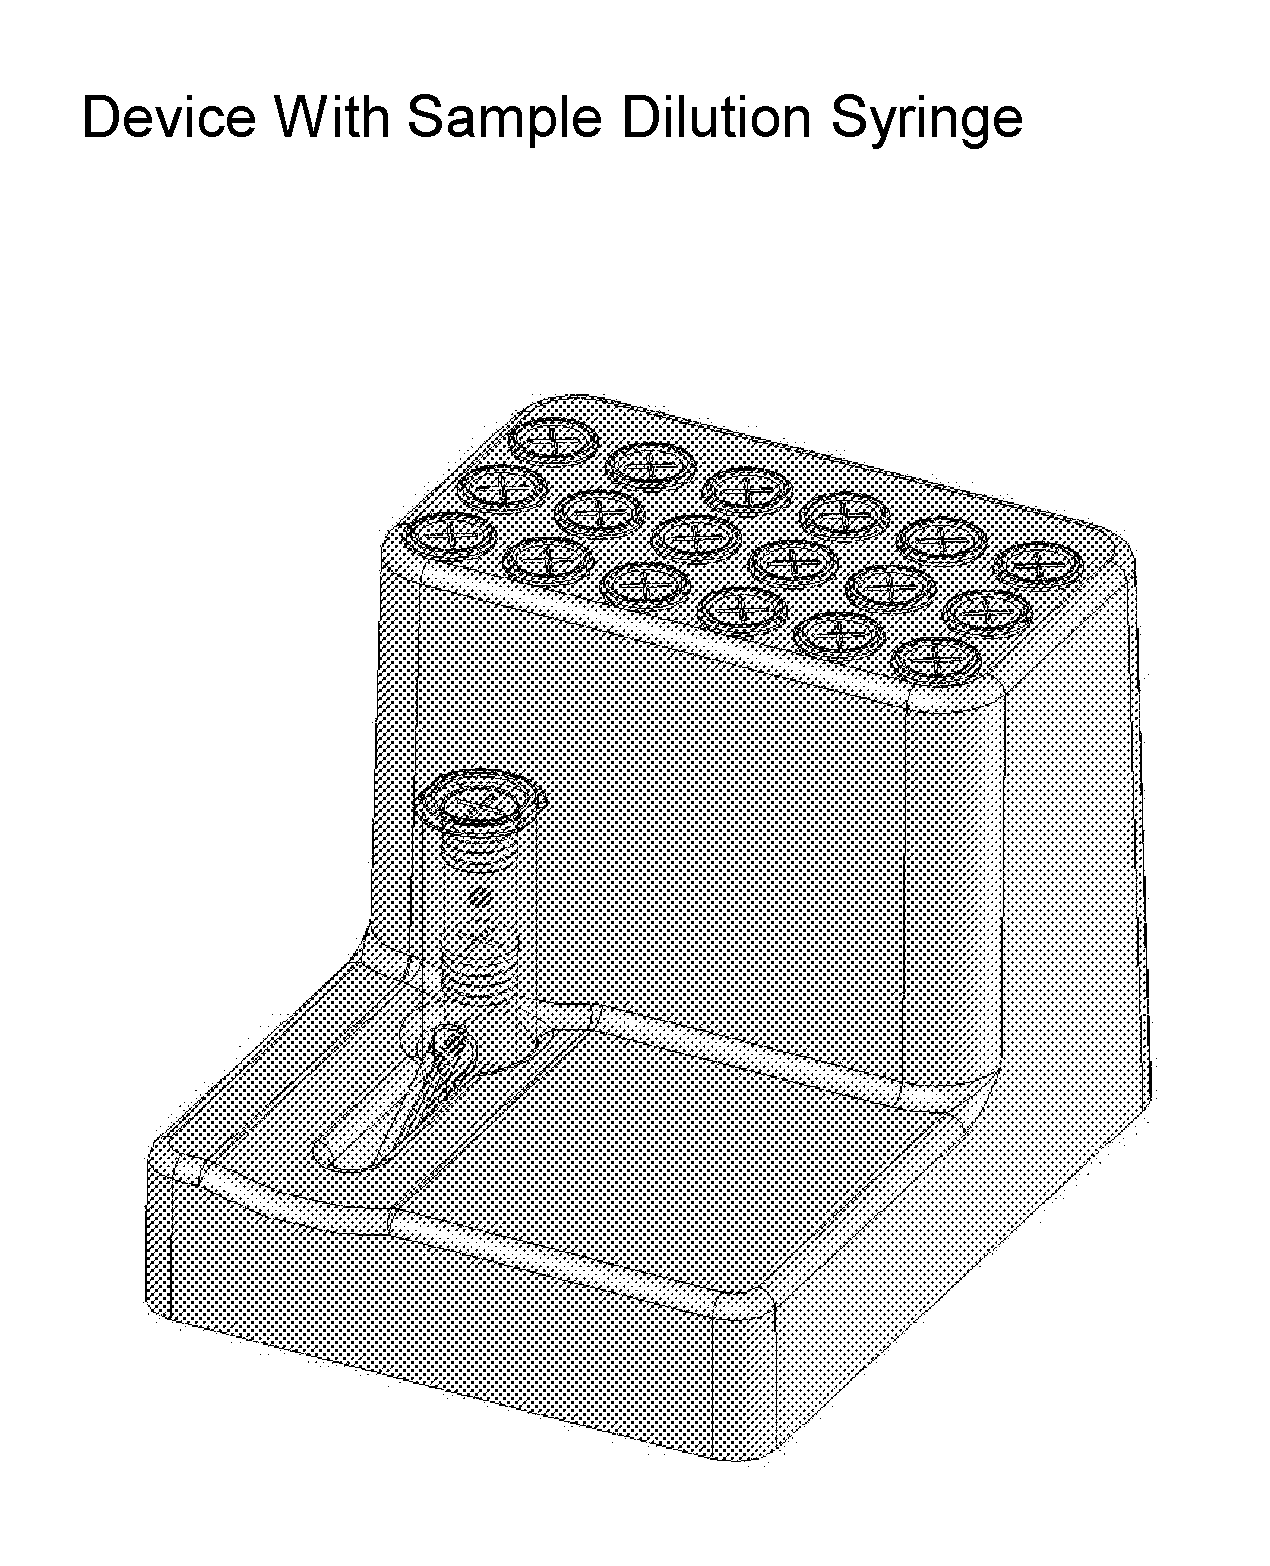 Systems and methods of fluidic sample processing